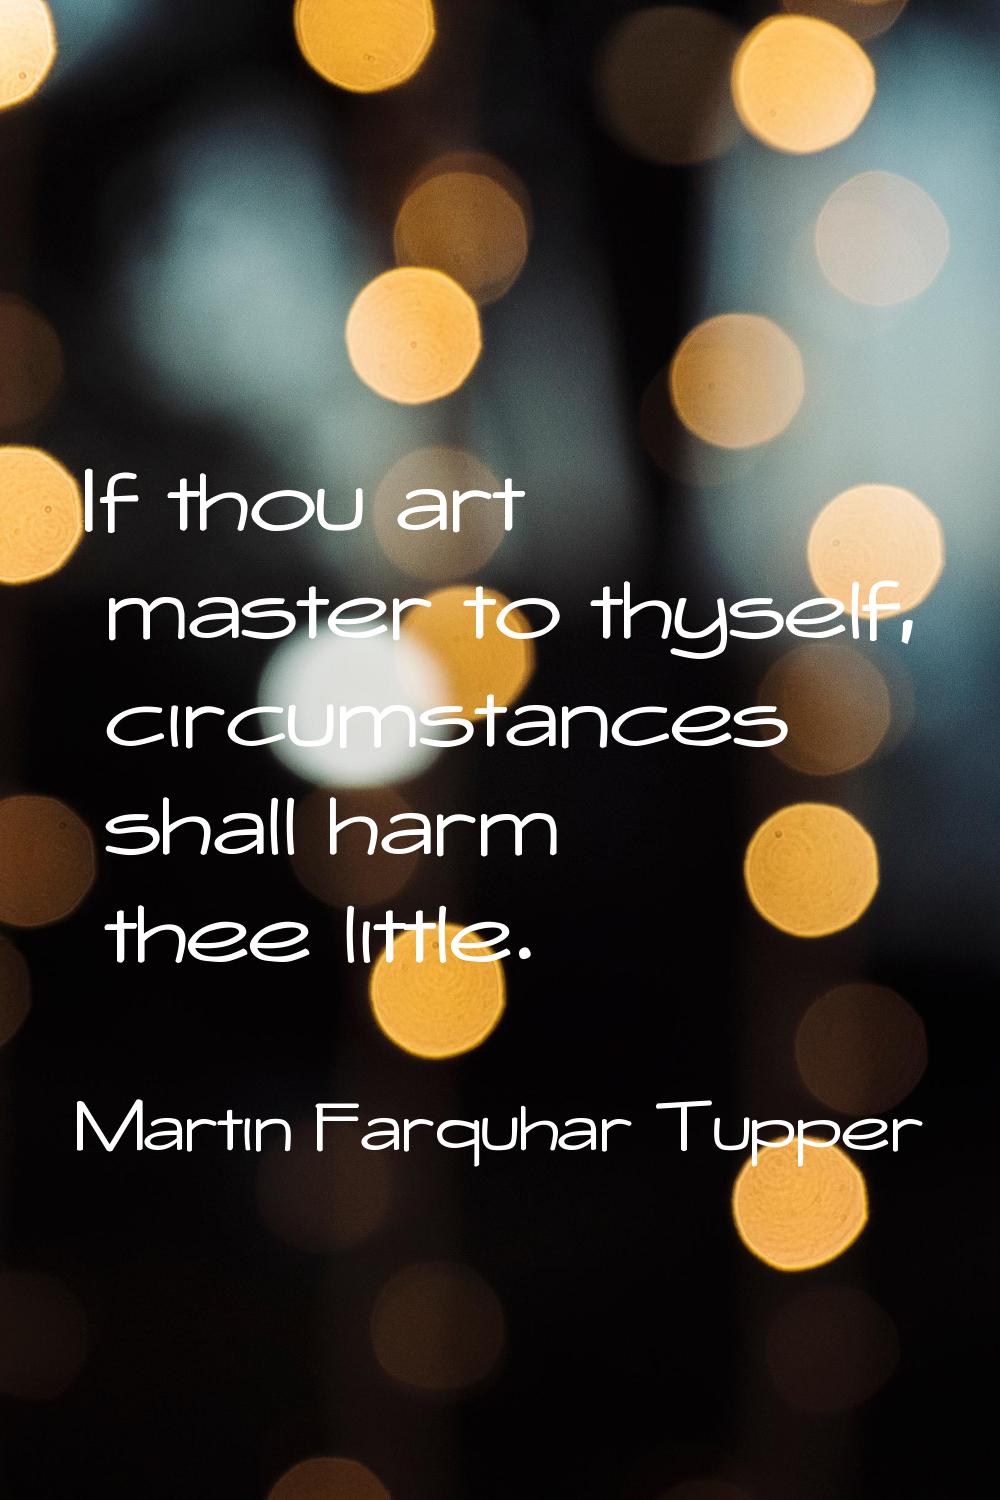 If thou art master to thyself, circumstances shall harm thee little.